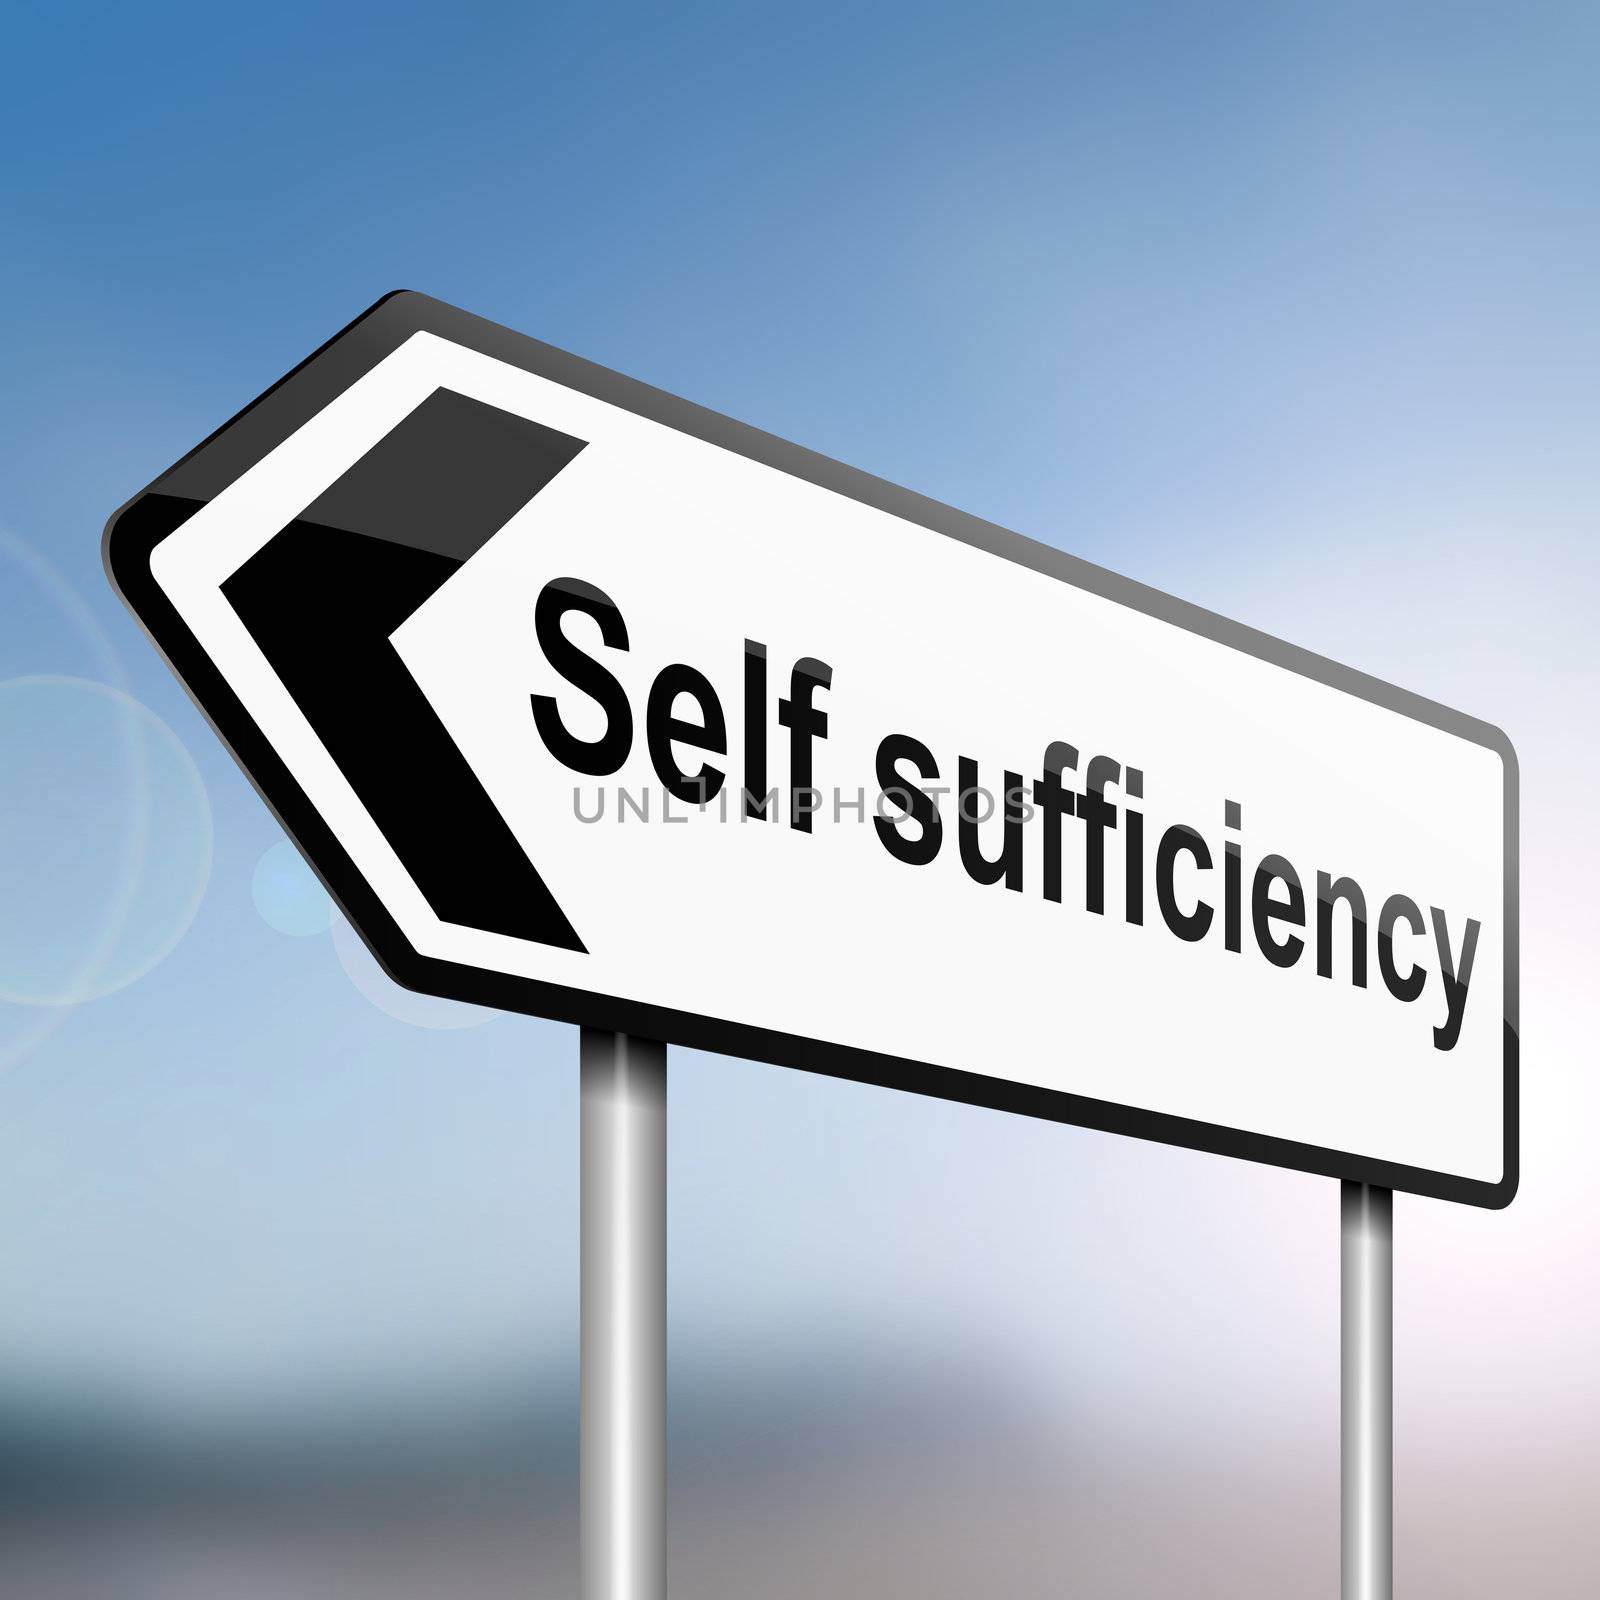 Self sufficiency. by 72soul